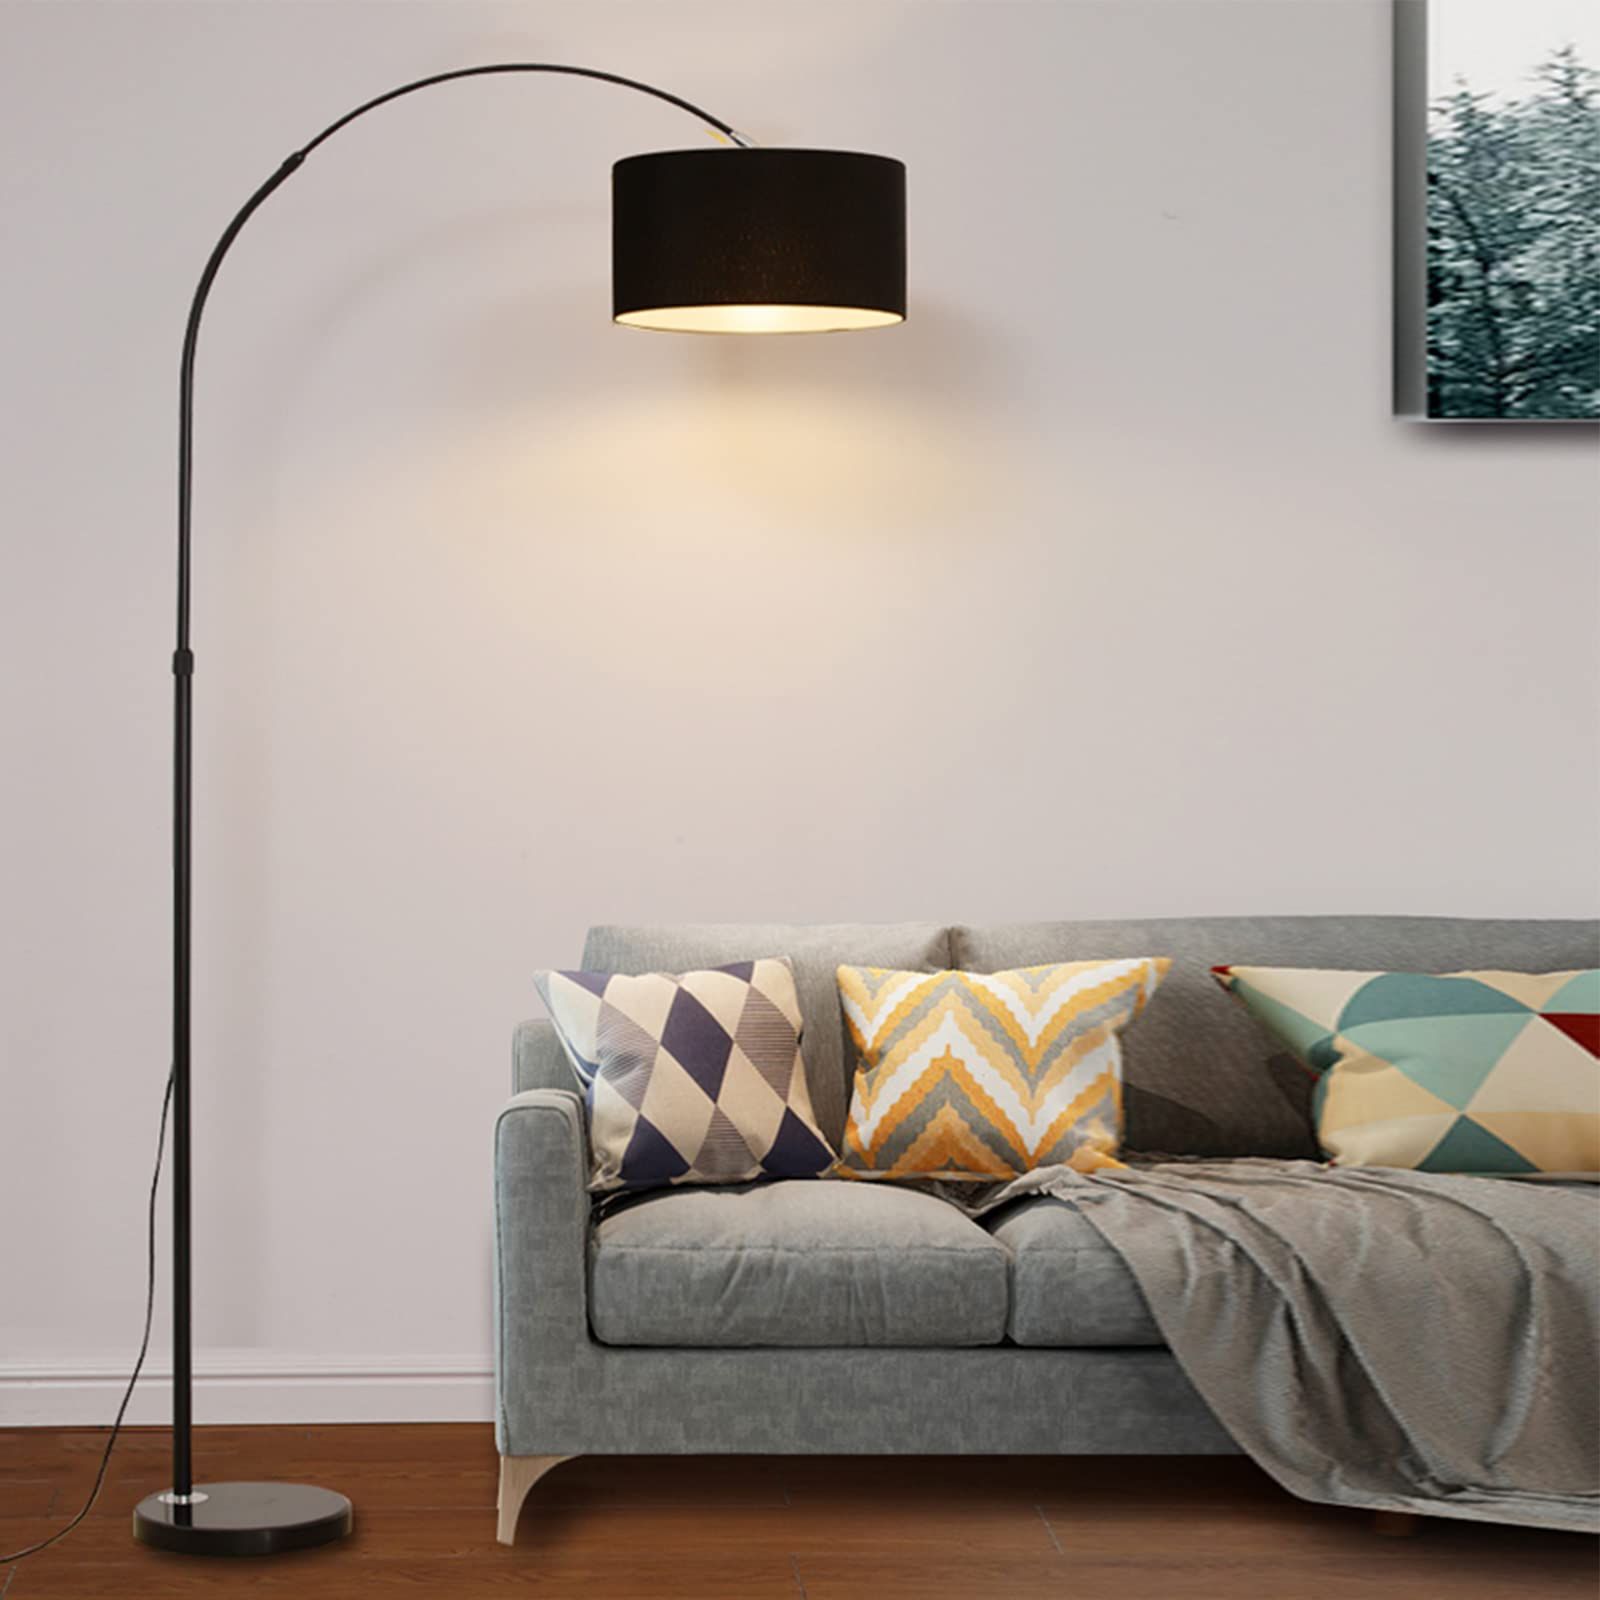 2019 Arc Standing Lamps Intended For Arc Floor Lamp Modern Standing Lamp For Living Room Dimmable 72” Tall Floor  Lamp Stand Up Reading Lamp Over Couch With Hanging Drum Shade Marble Base  For Bedroom Reading Study Office – – (View 8 of 10)